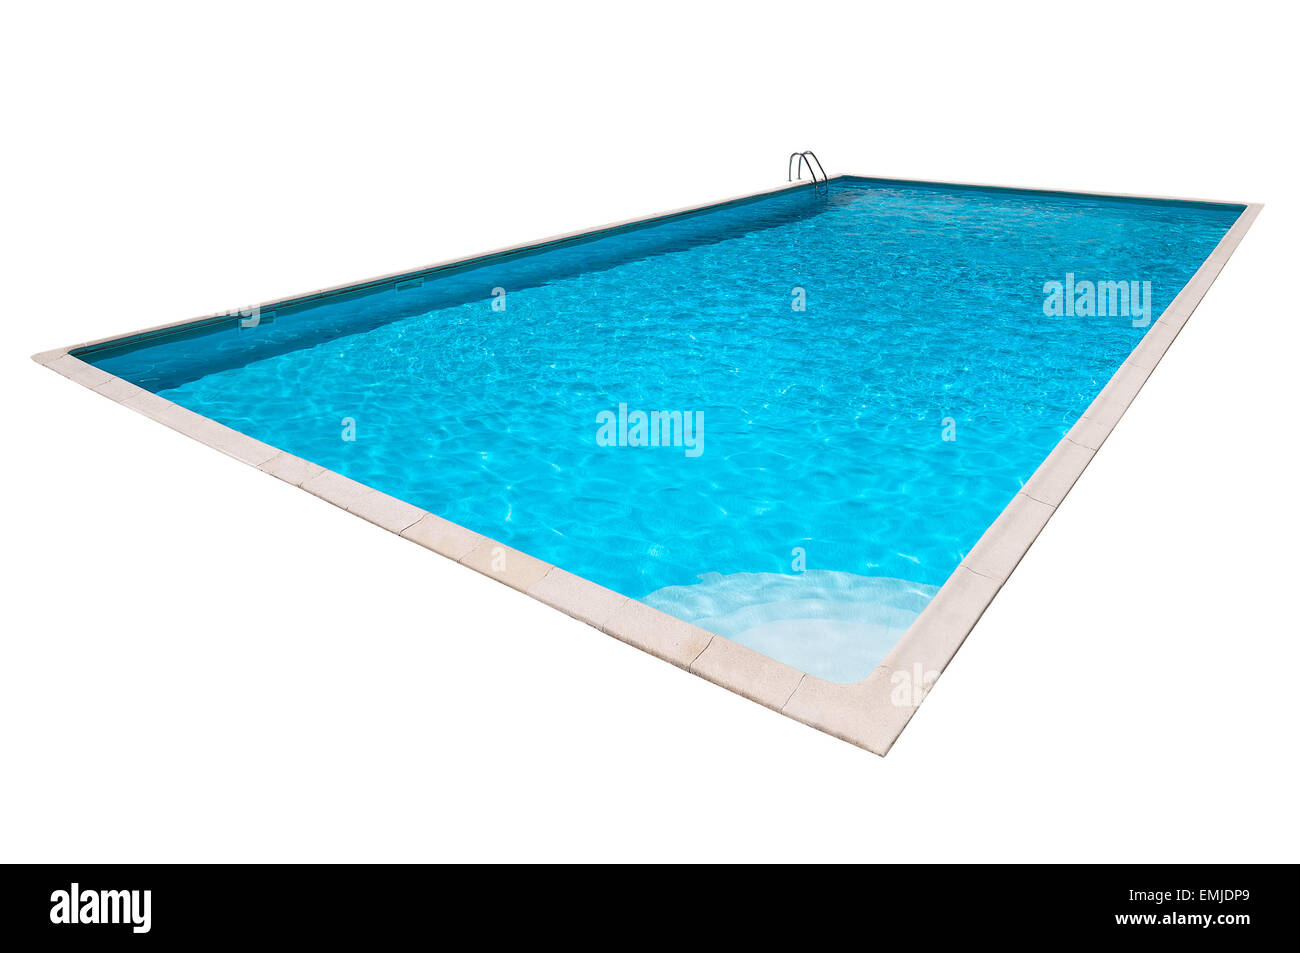 Rectangular Swimming pool with blue water isolated Stock Photo